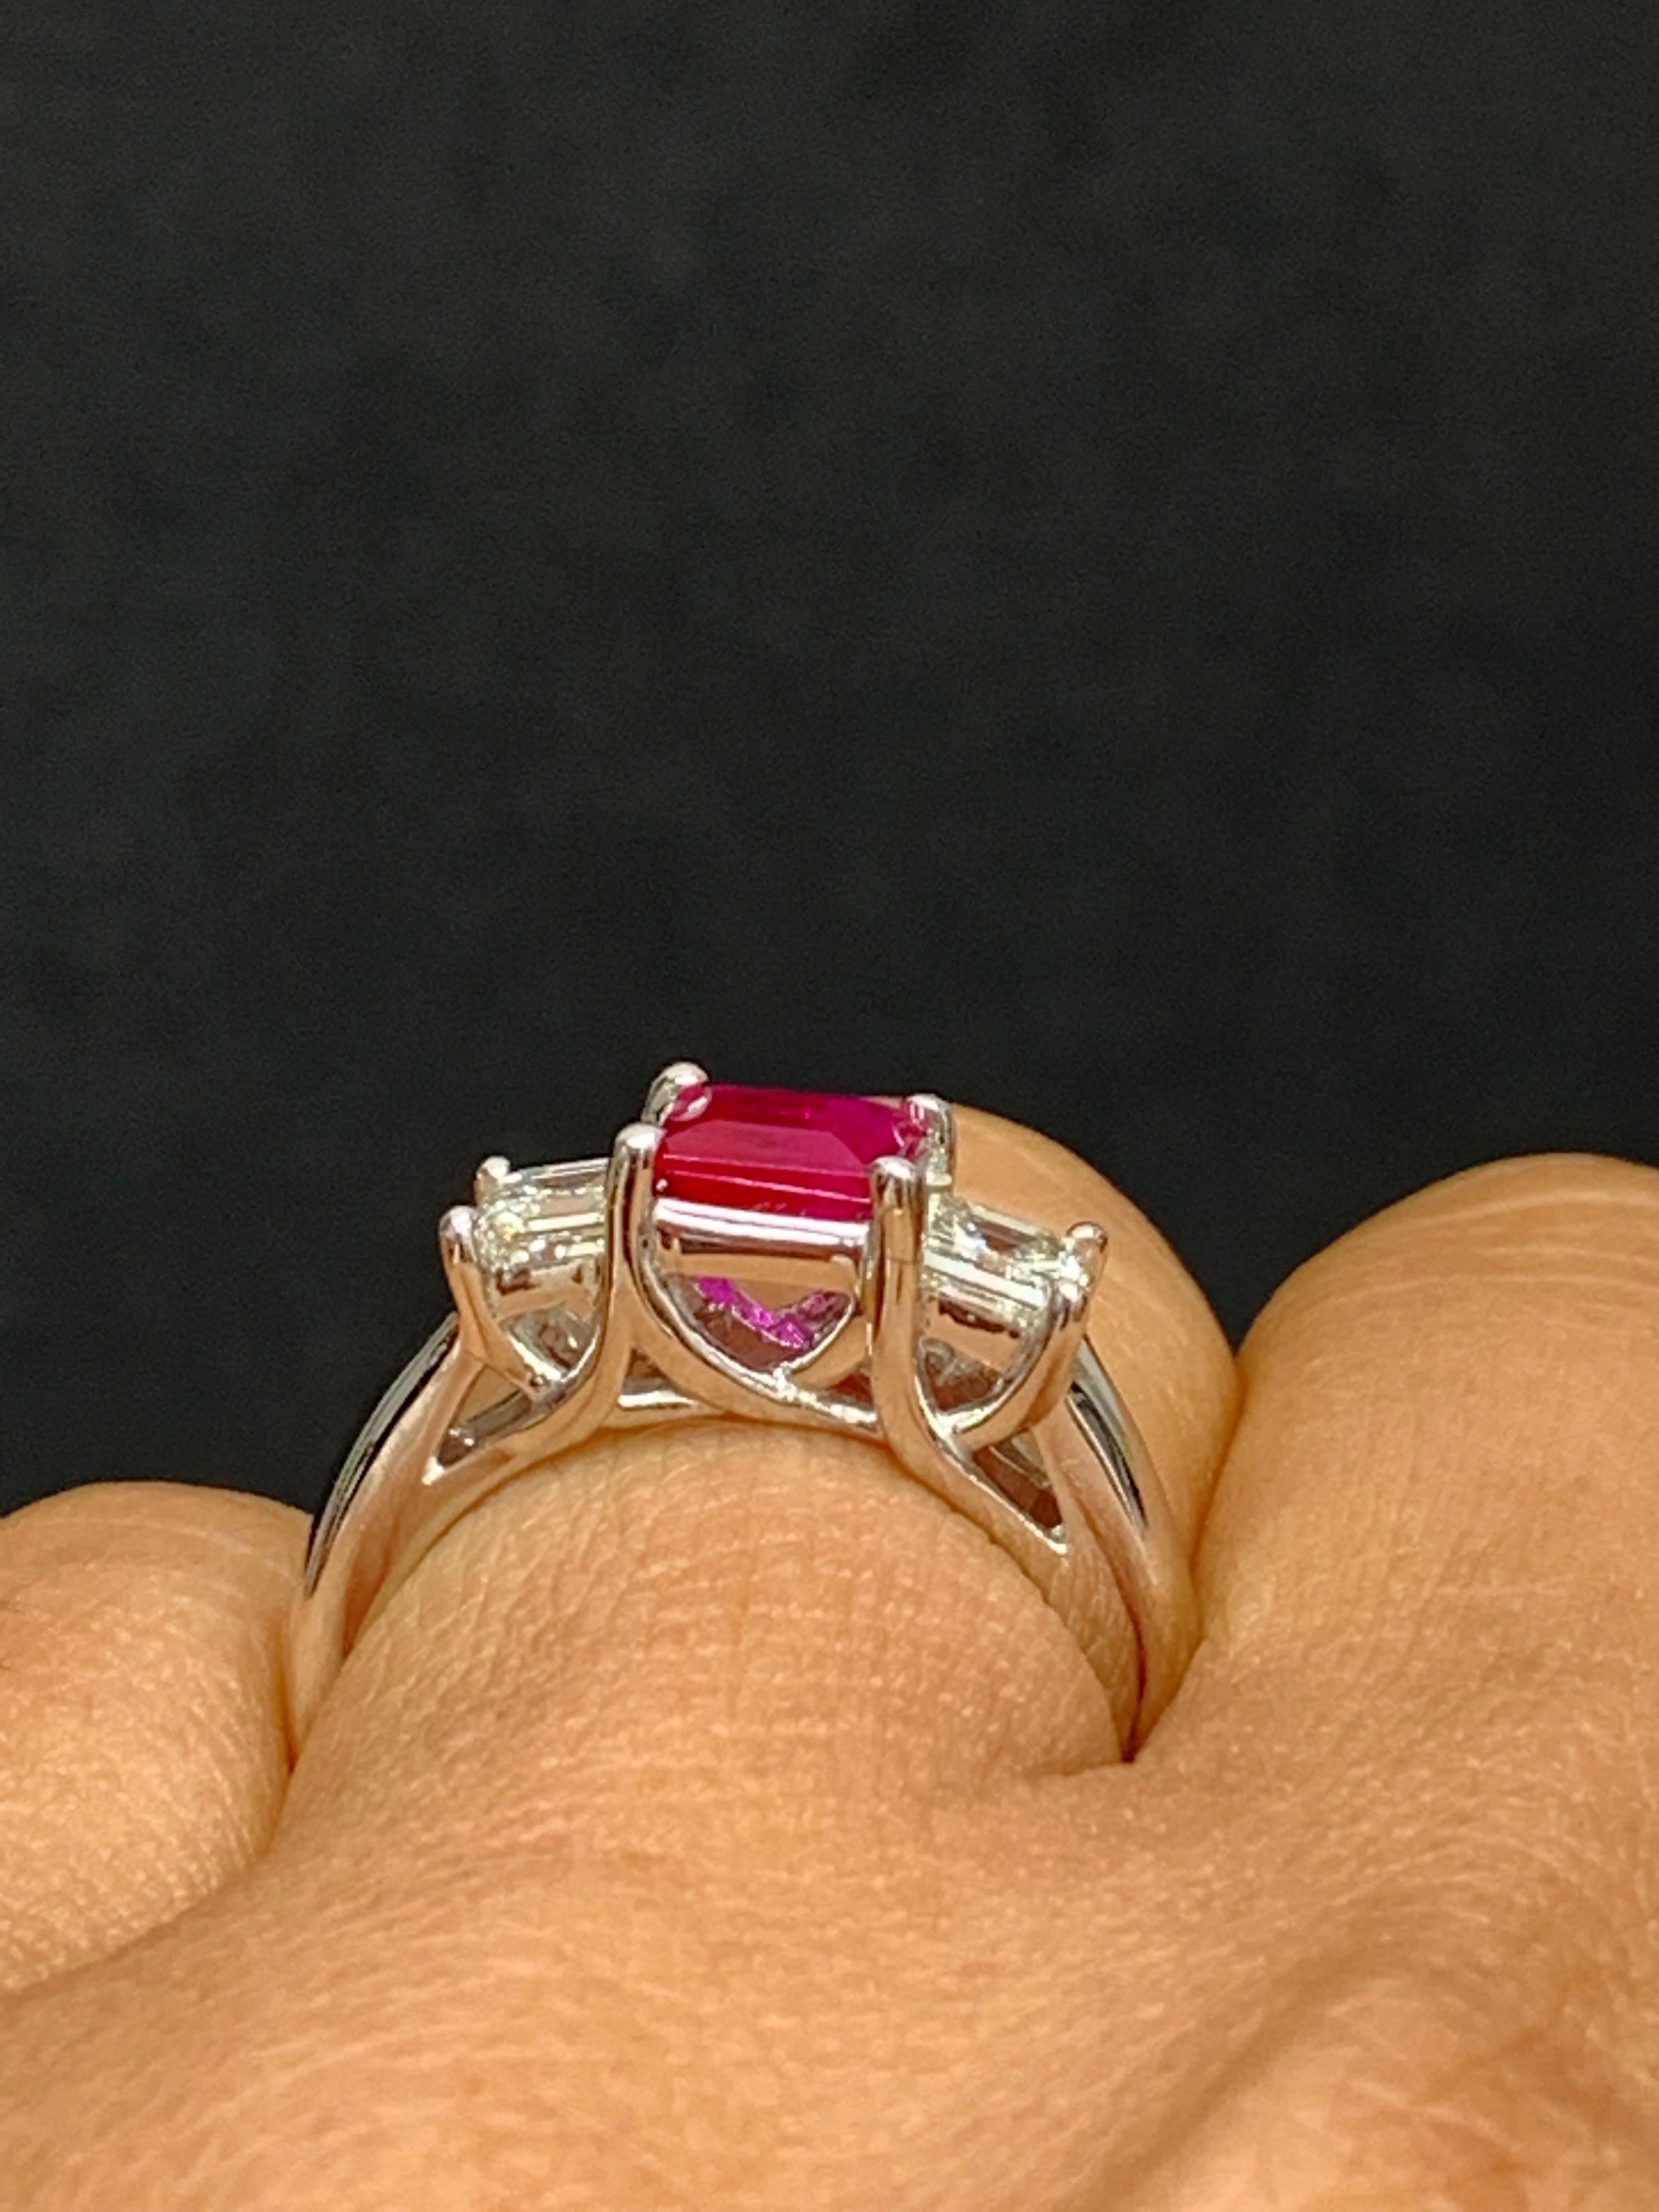 0.92 Carat Emerald Cut Ruby and Diamond Three-Stone Engagement Ring in 14K For Sale 4